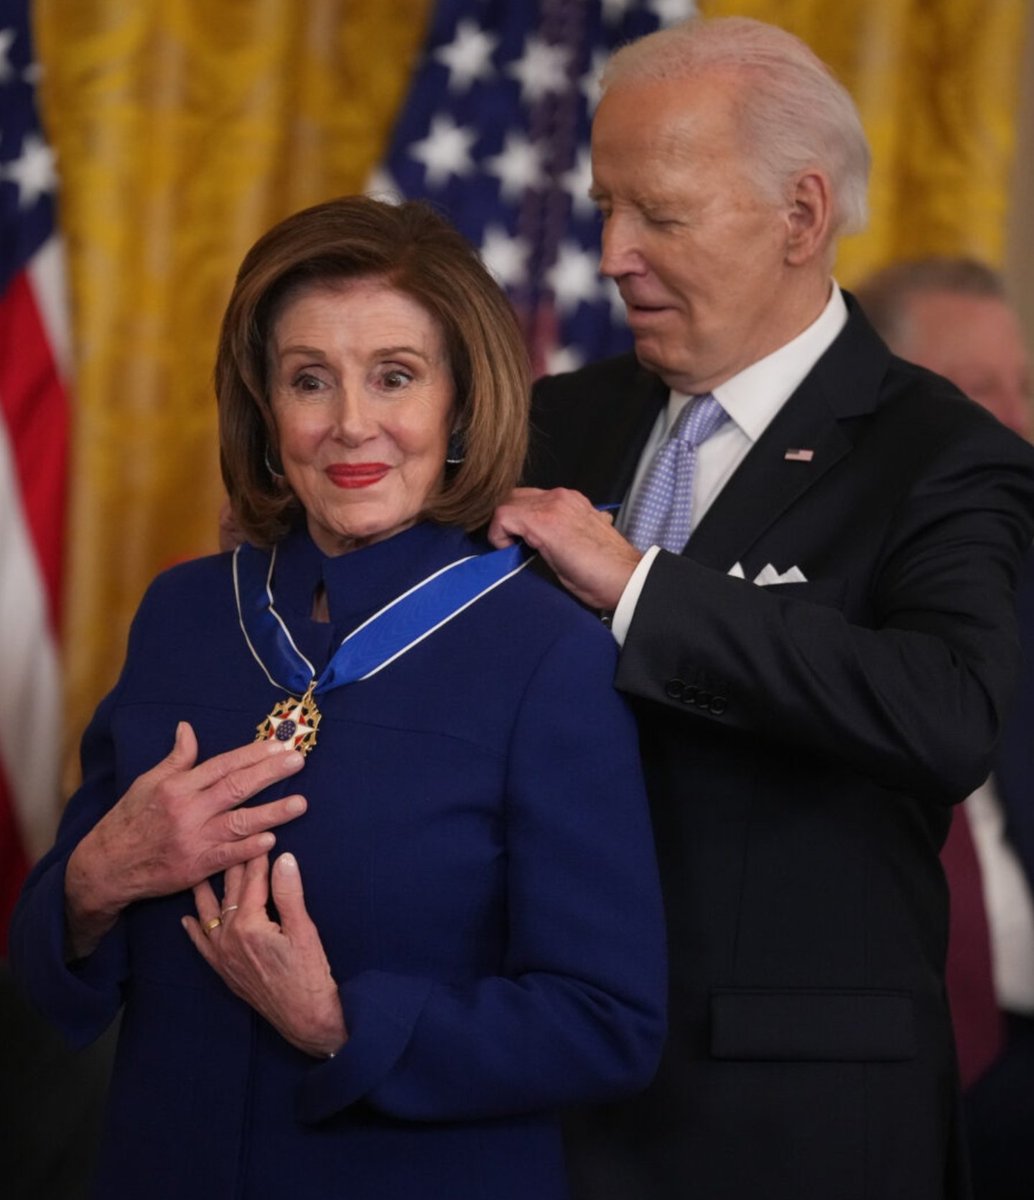 HUGE CONGRATULATIONS to Speaker Emerita Nancy Pelosi, recipient of the Presidential Medal of Freedom, and the most effective and consequential Speaker of my lifetime. A well-deserved honor. 🙏💪